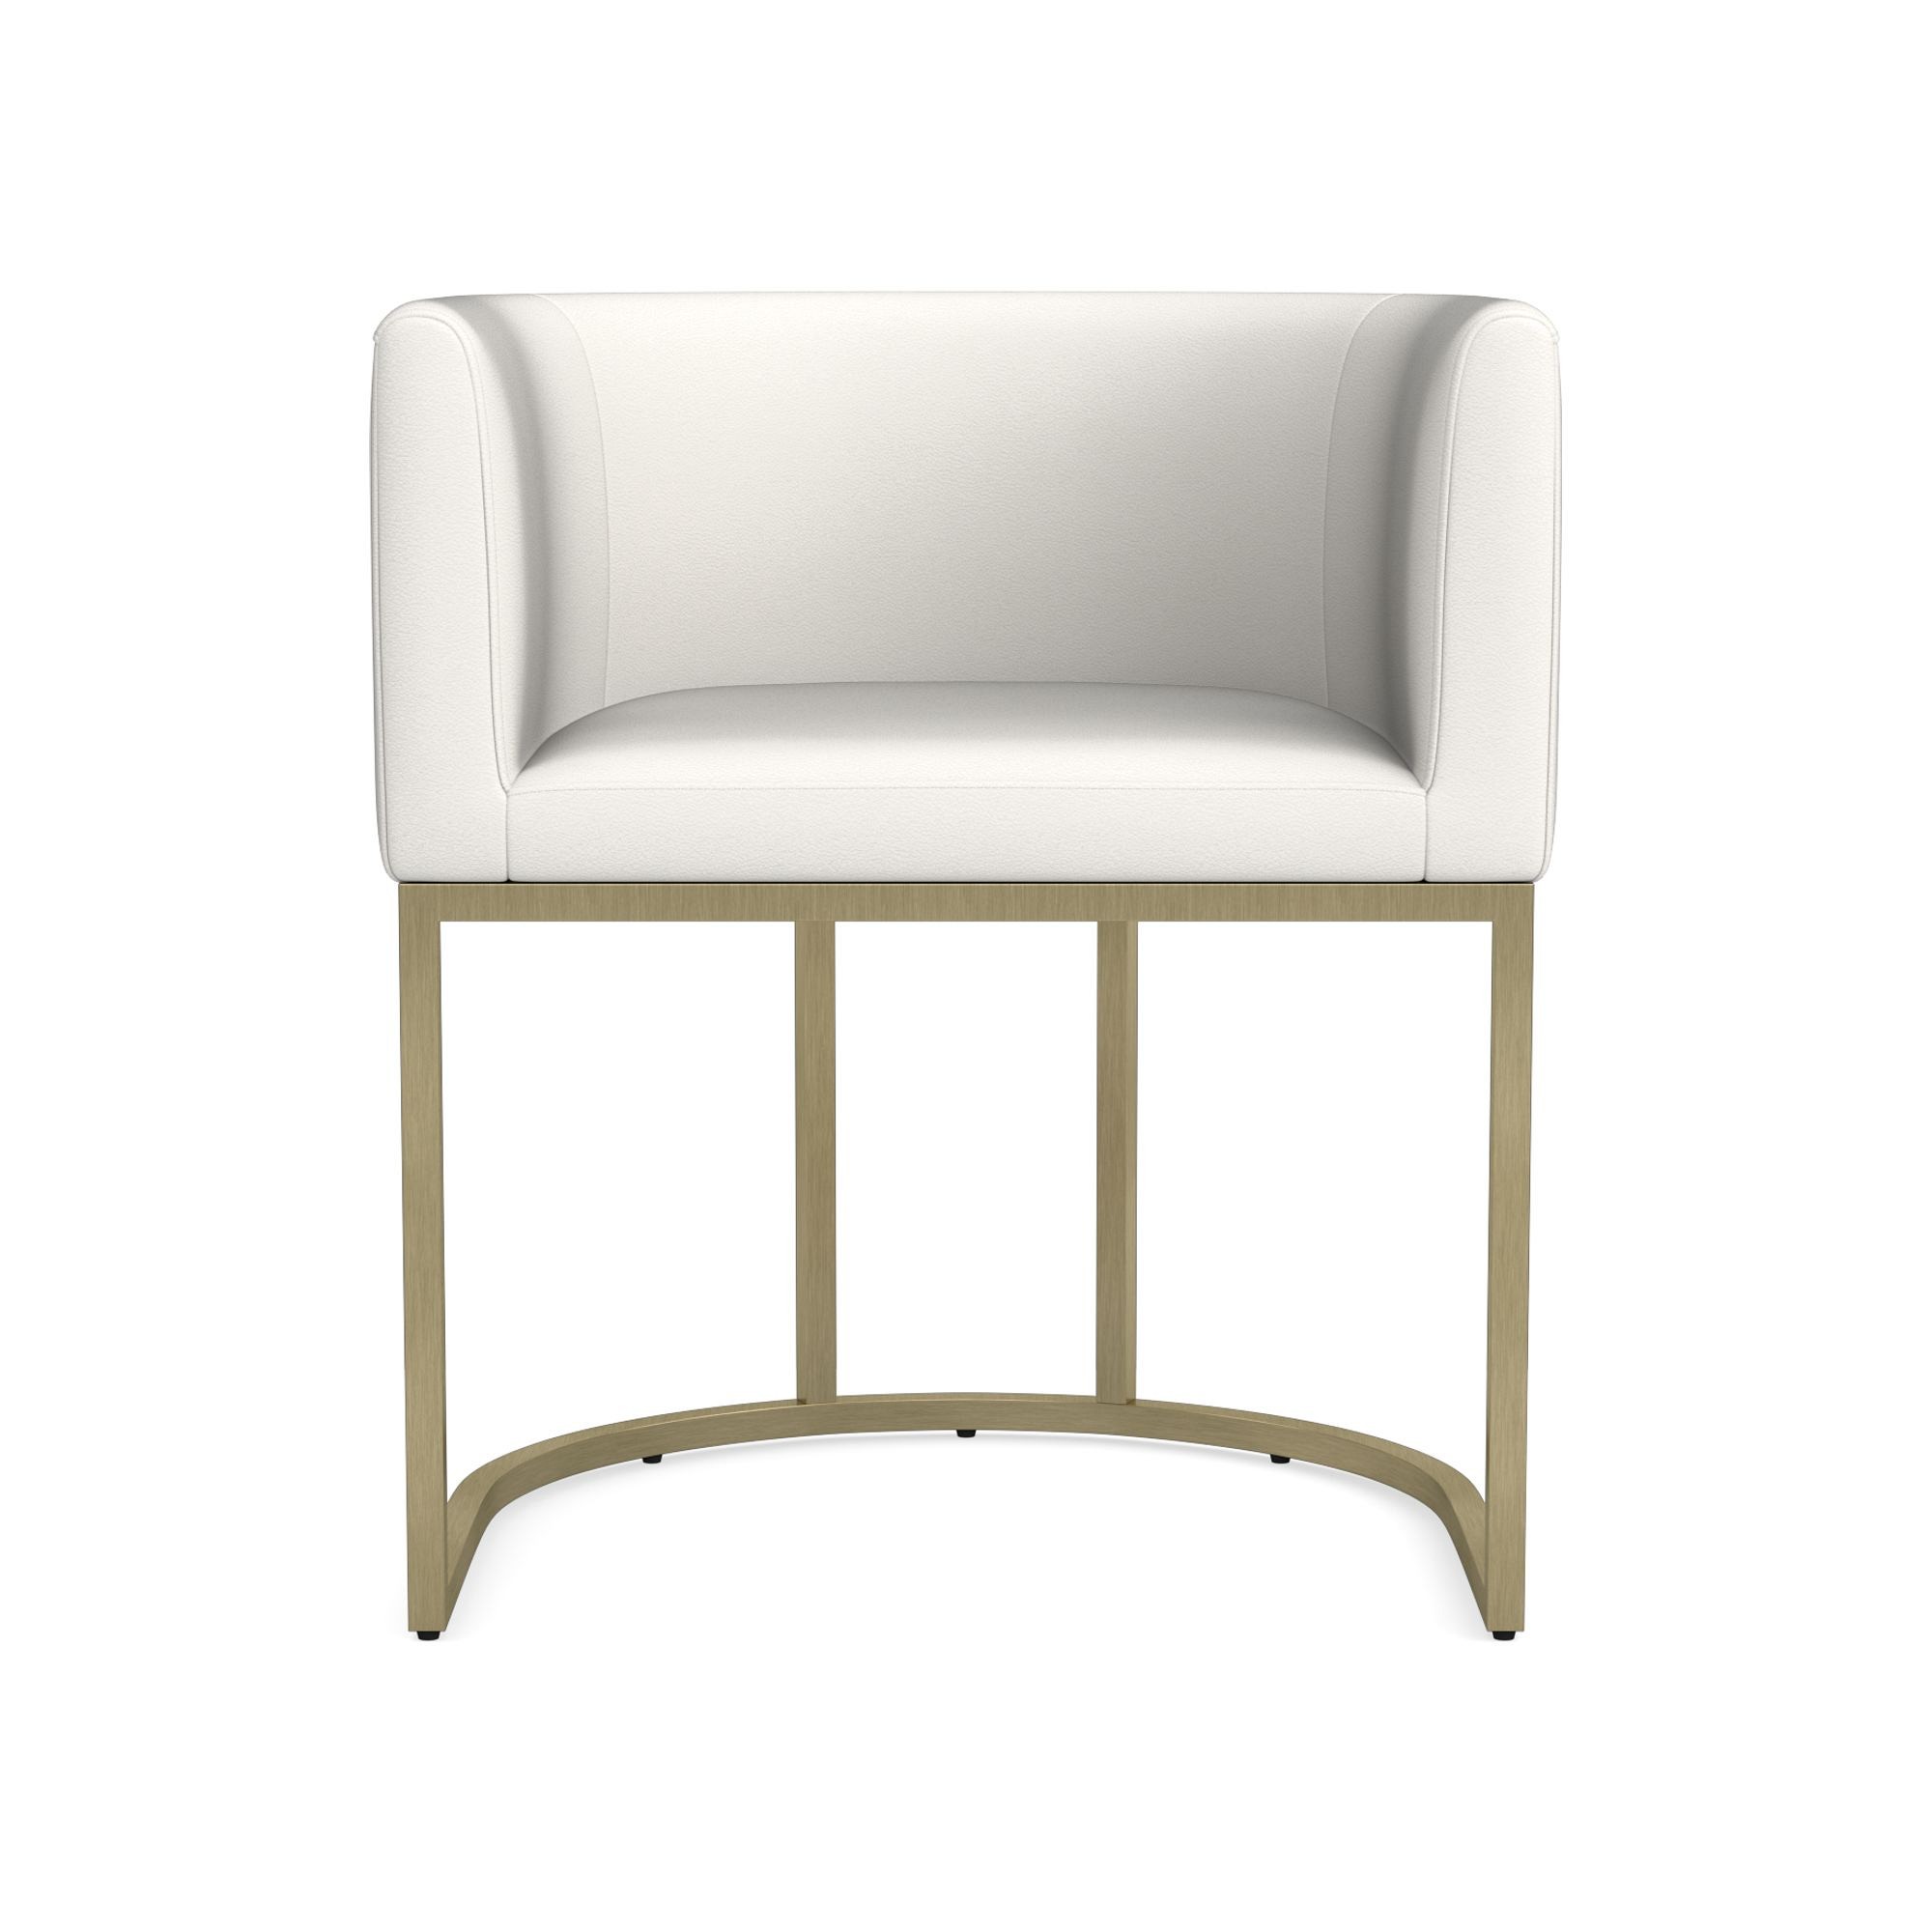 Verona Upholstered Dining Chair